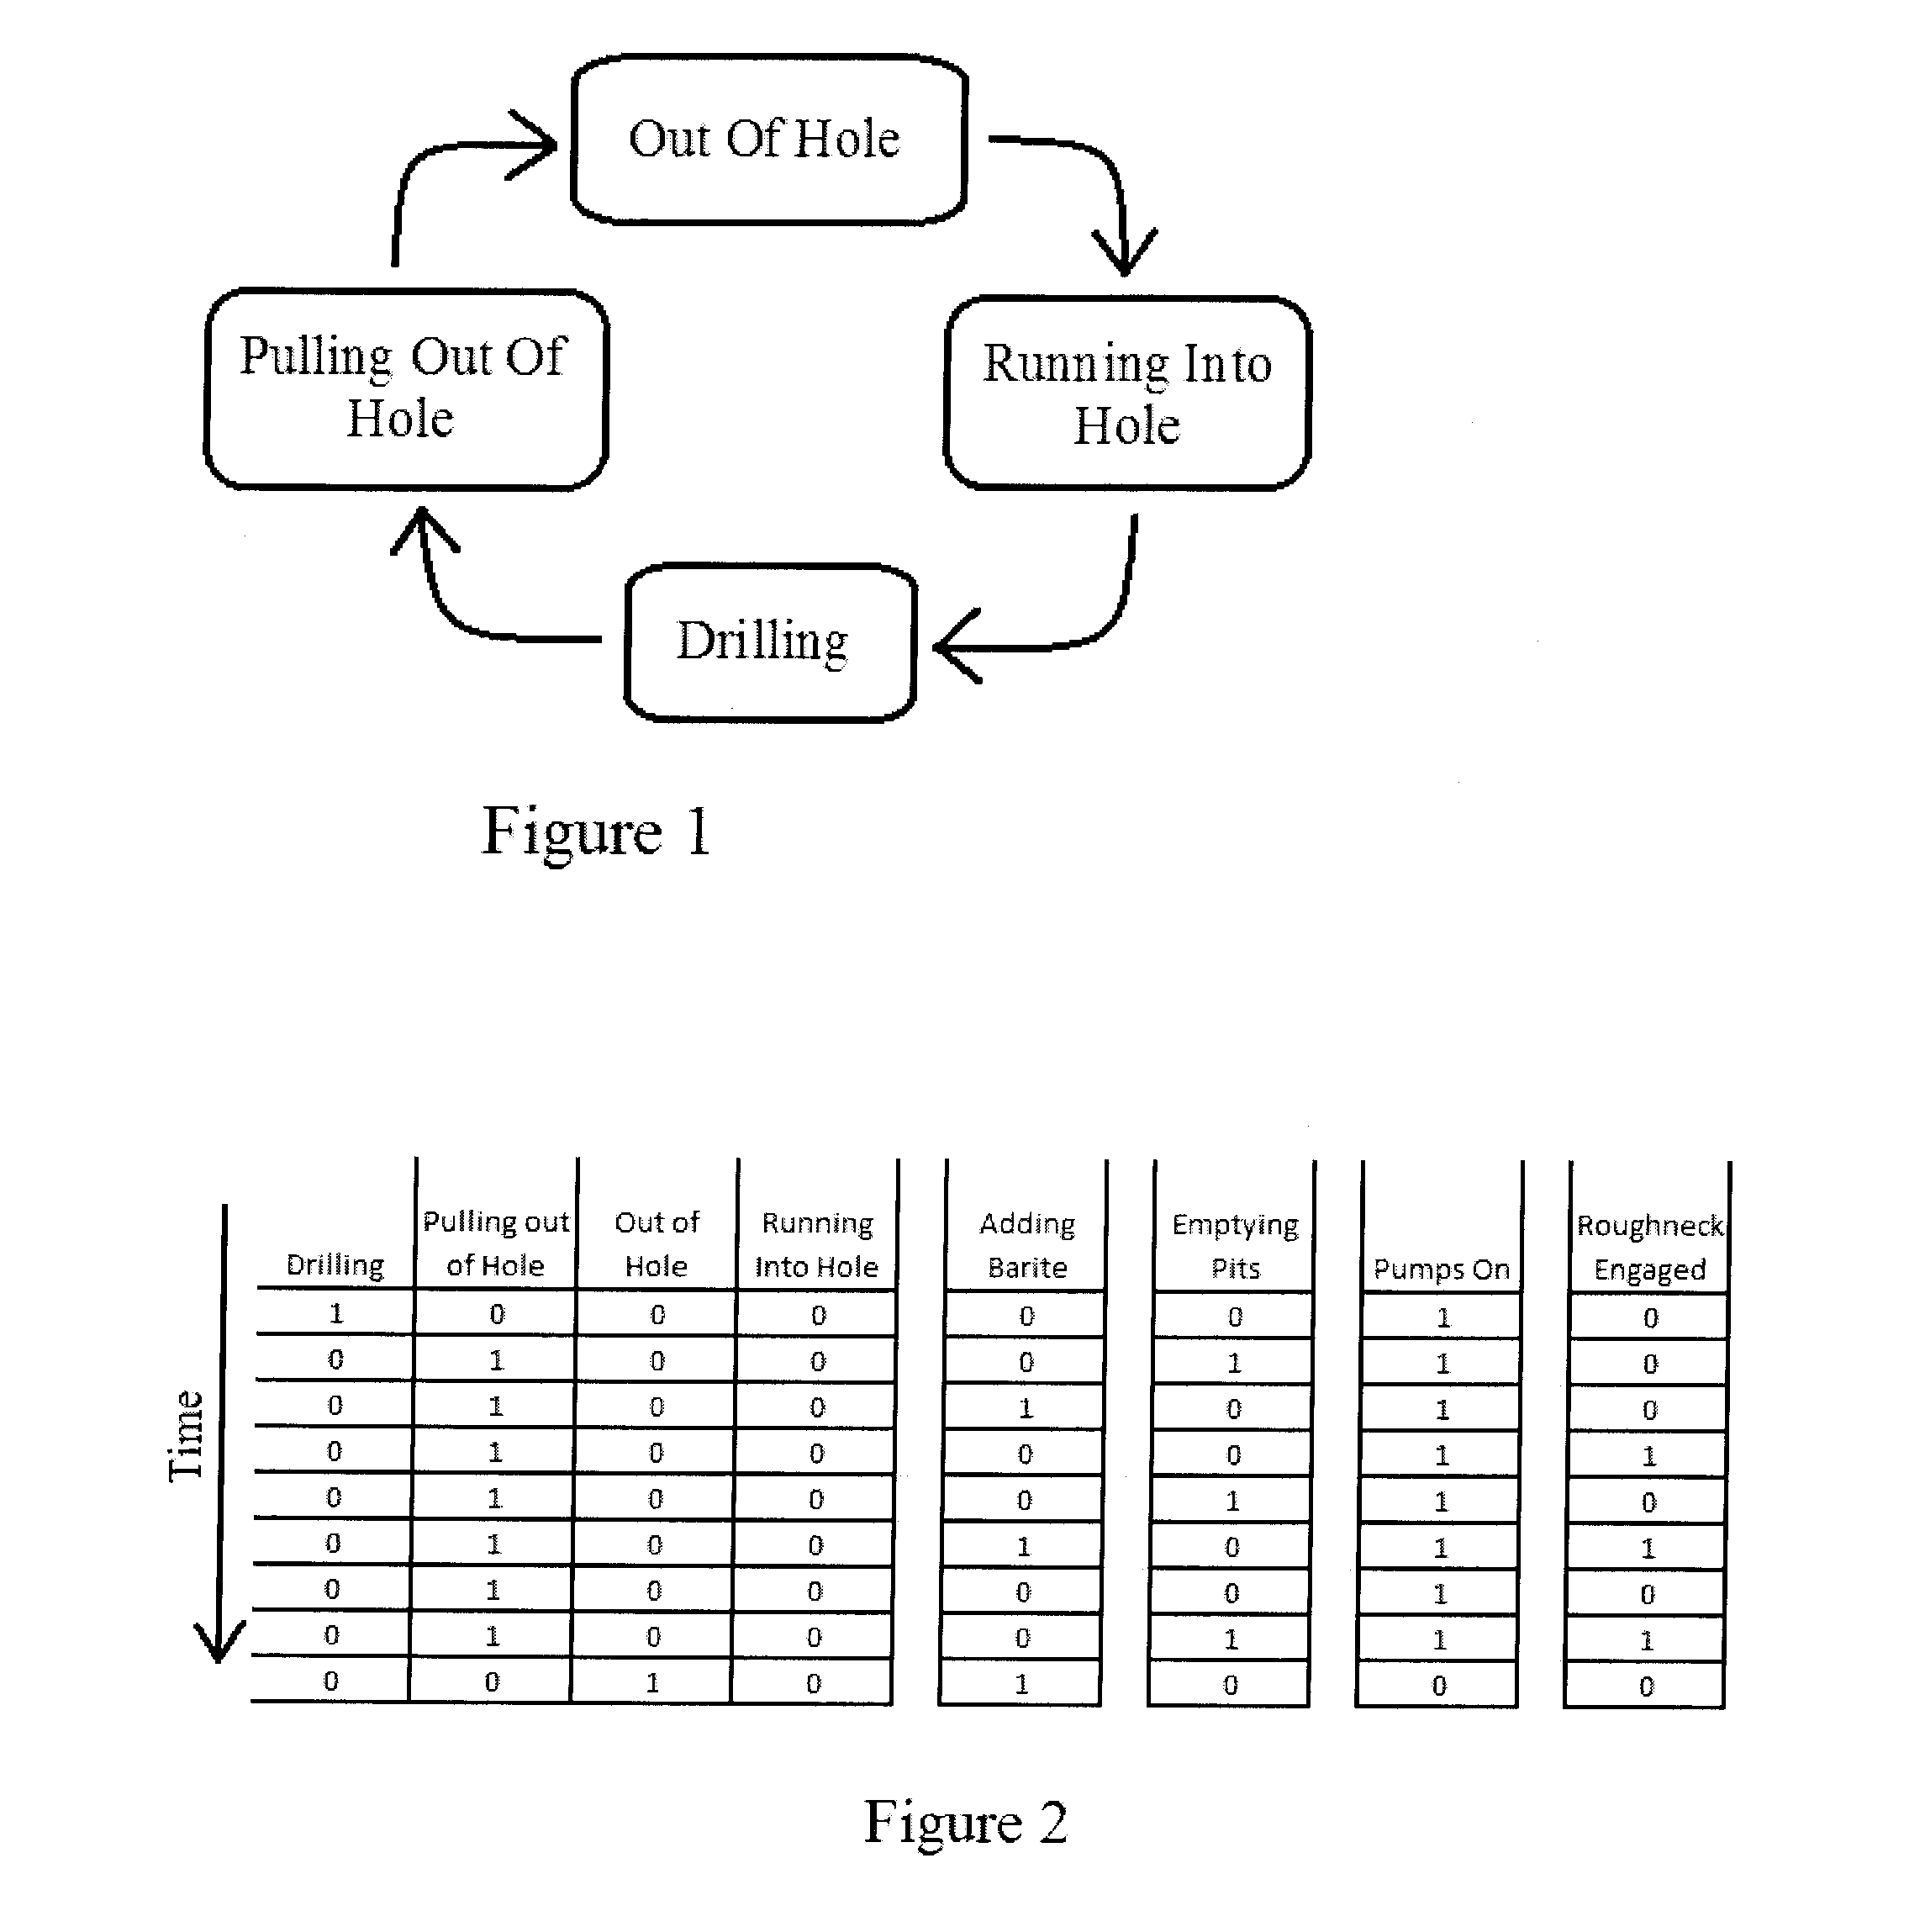 System and method for estimating rig state using computer vision for time and motion studies